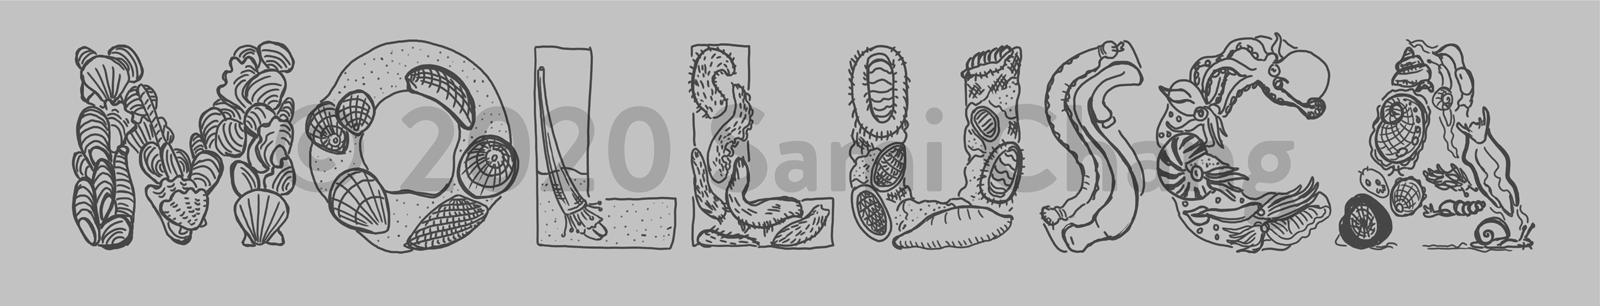 MOLLUSCA sketch, with each letter illustrating a group of mollusks